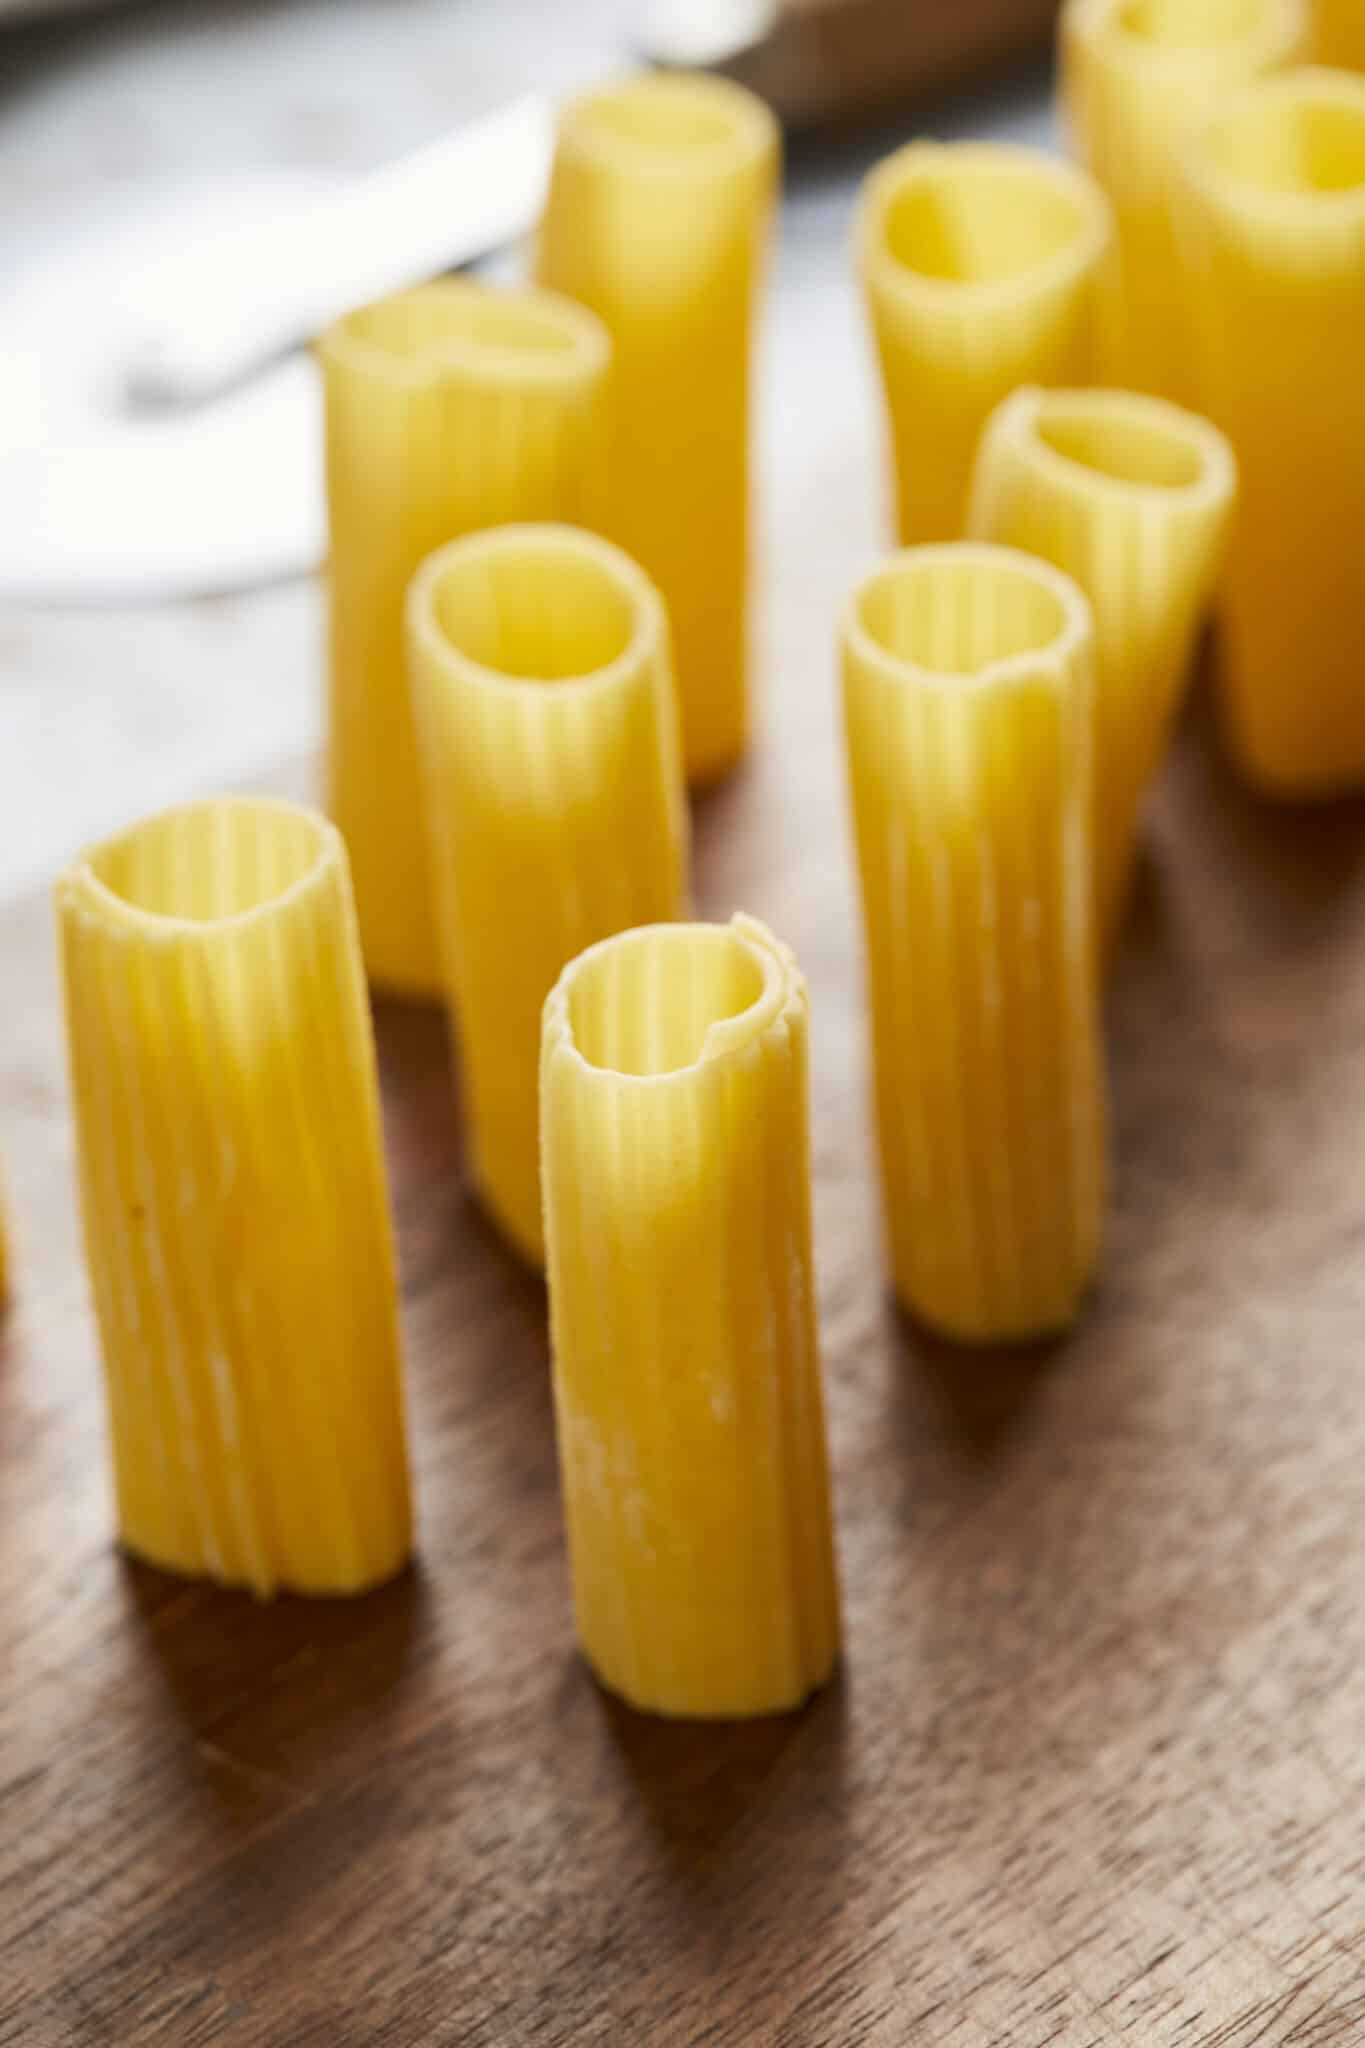 Rigatoni pasta is drying upright on a wooden board. It's in yellow color, a ridged, tubular shape and about 2 inches long with squared-off ends.